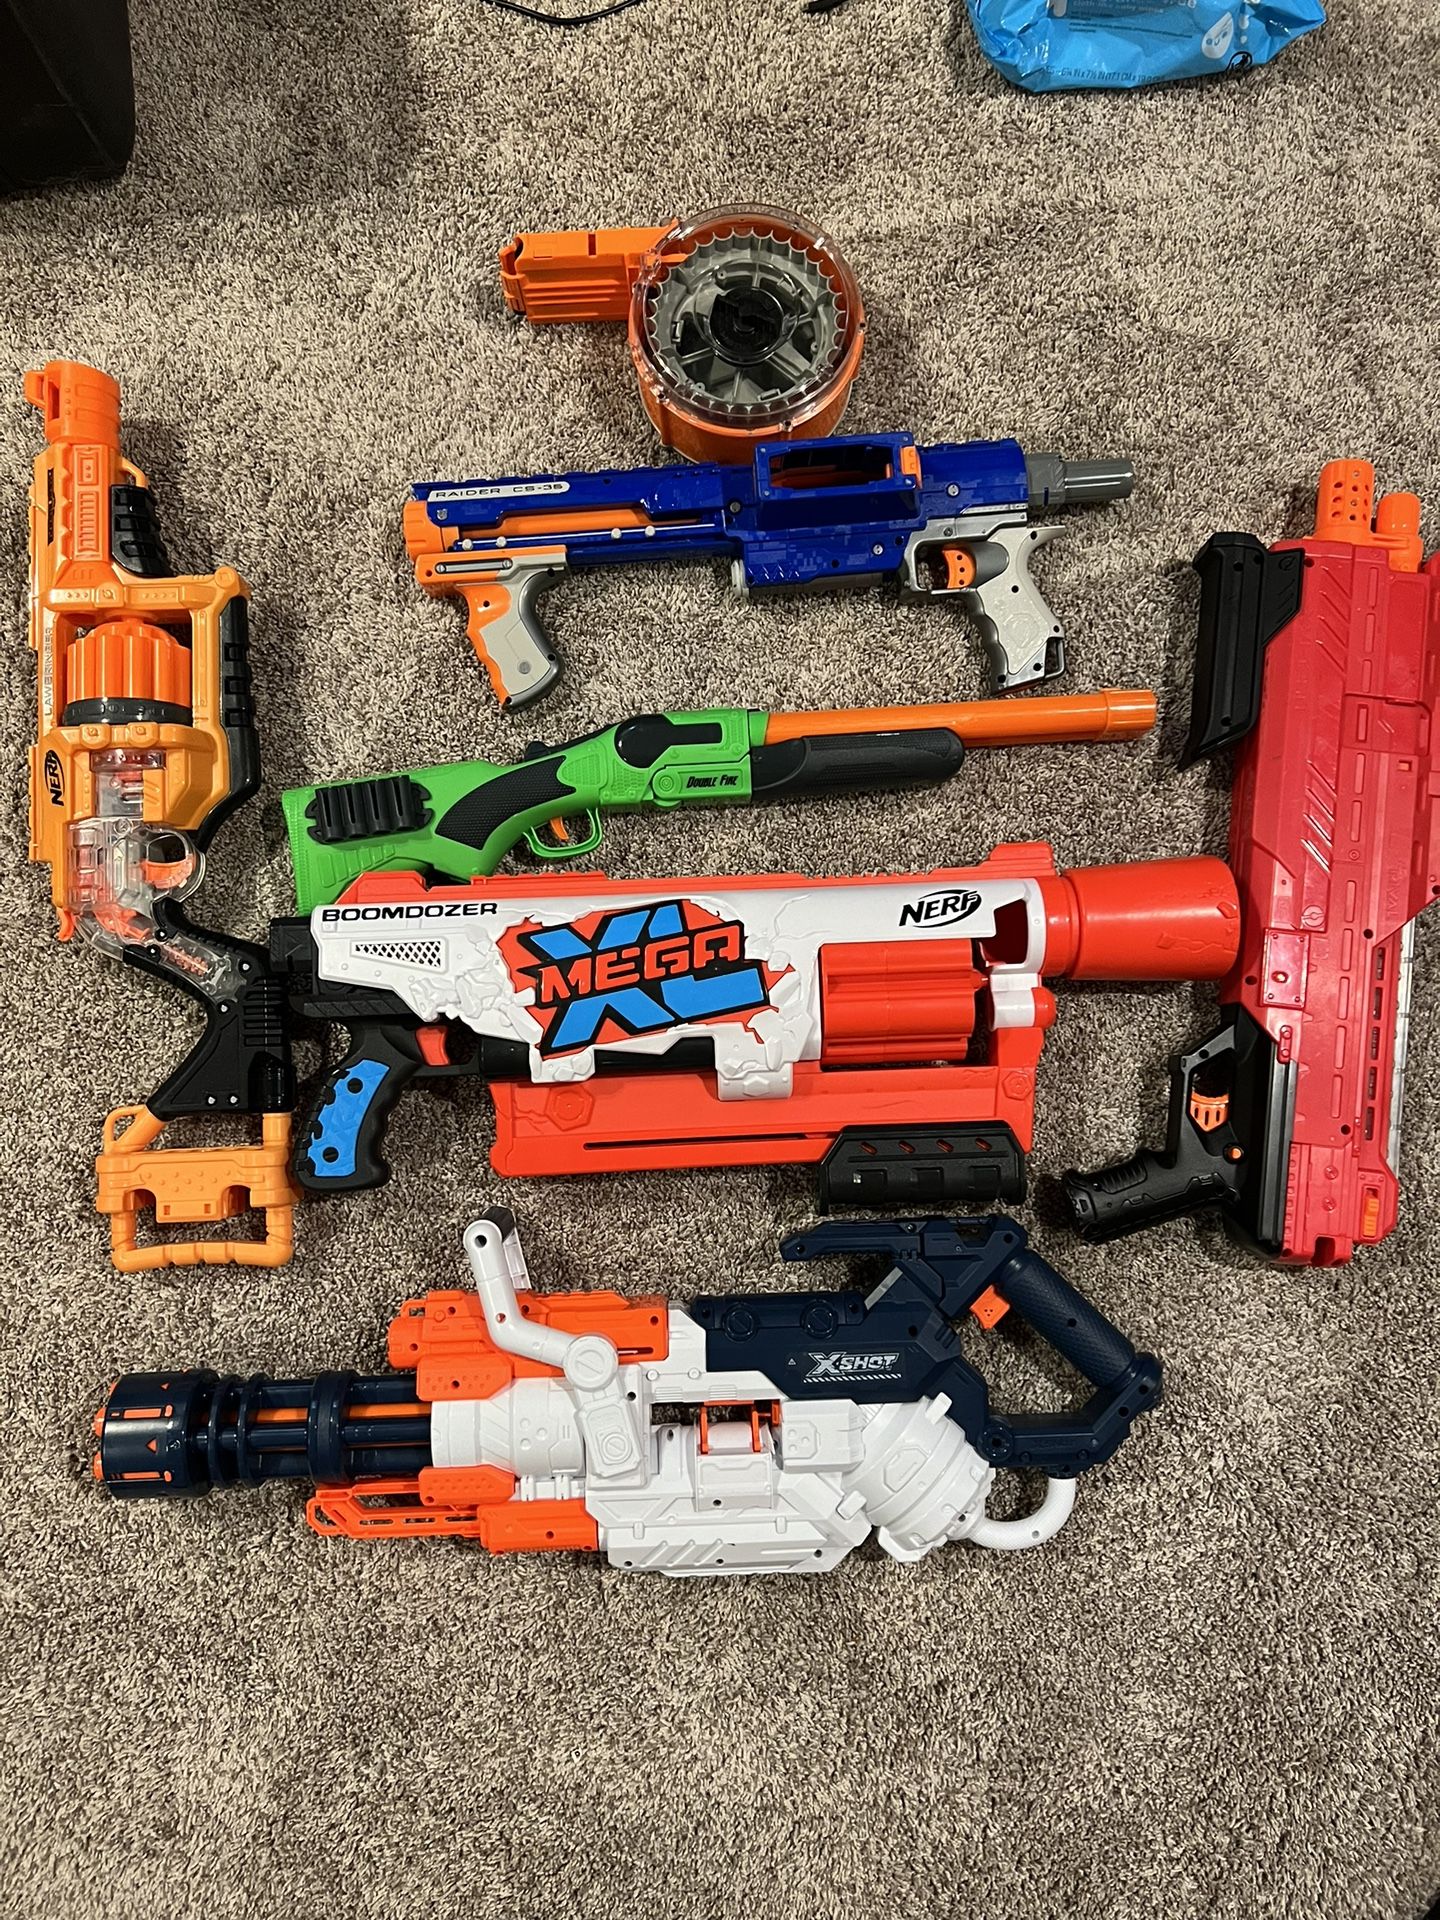 Large Nerf Blasters Special Price! $30 For All